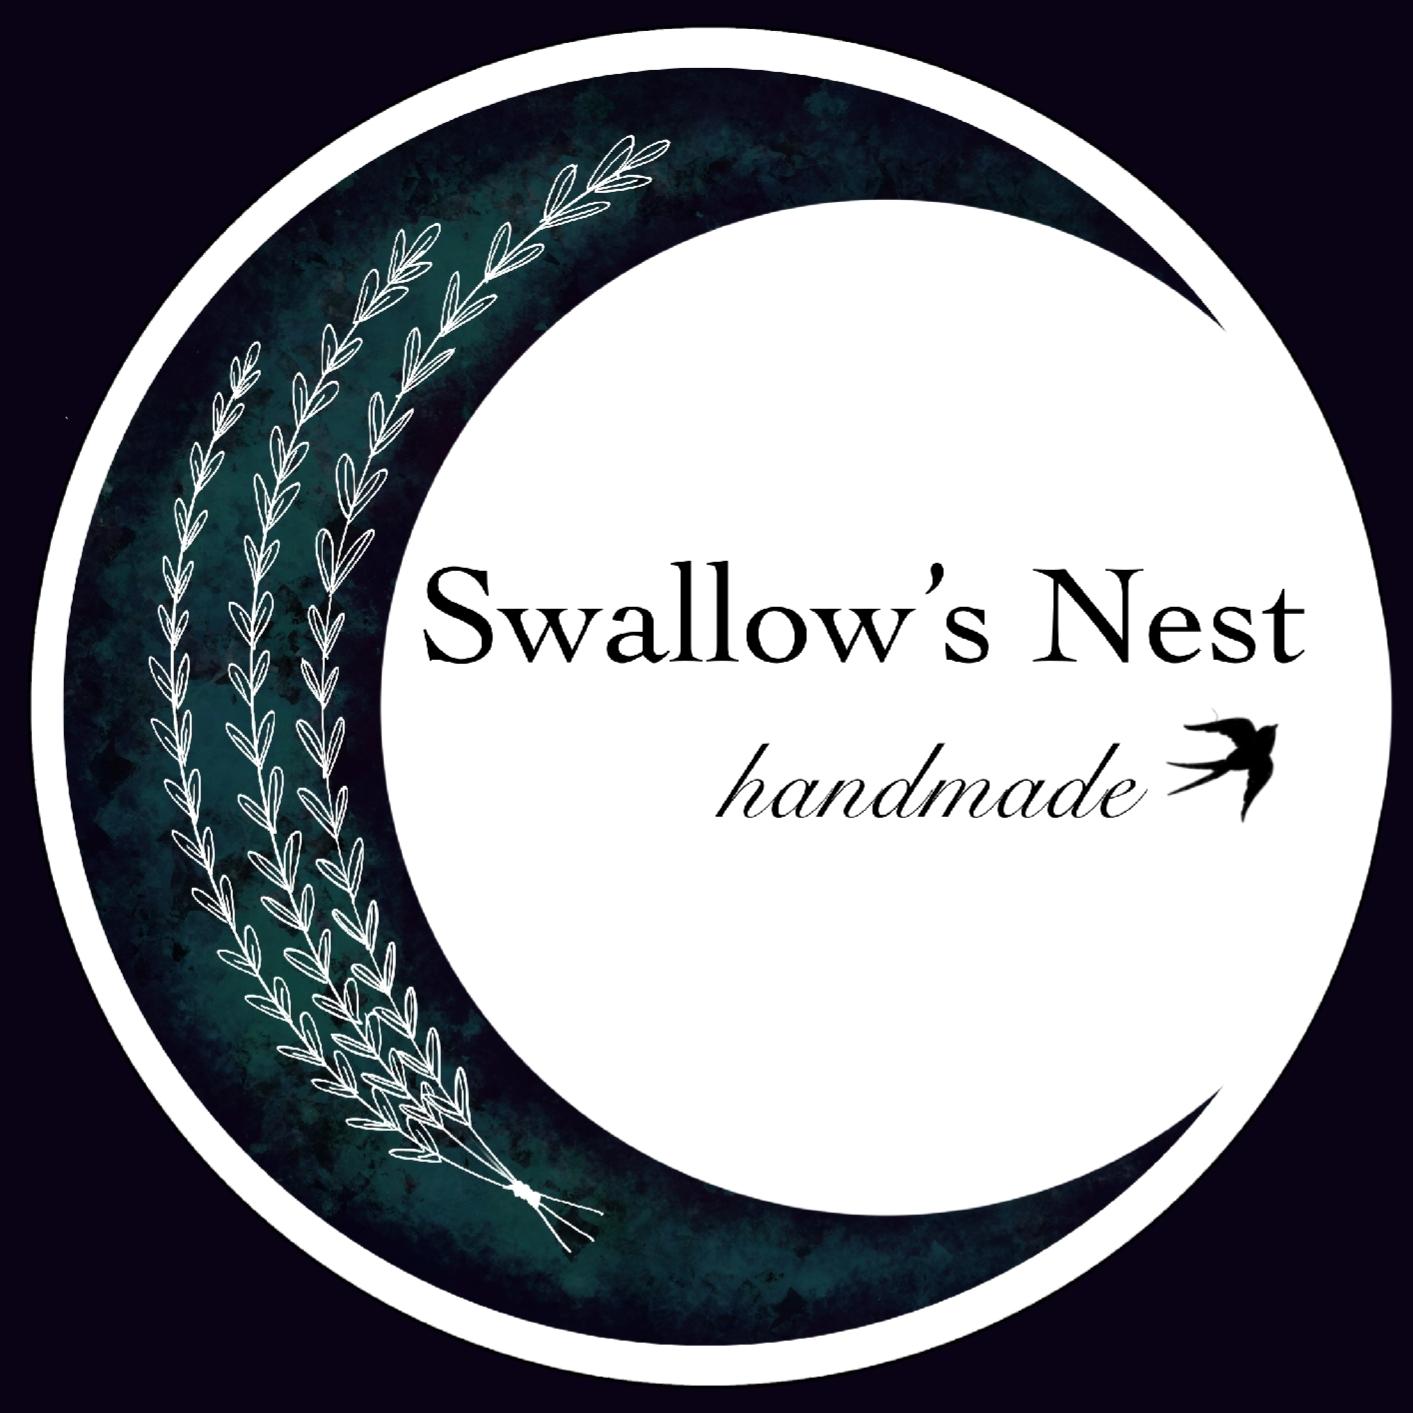 SwallowsNest's images